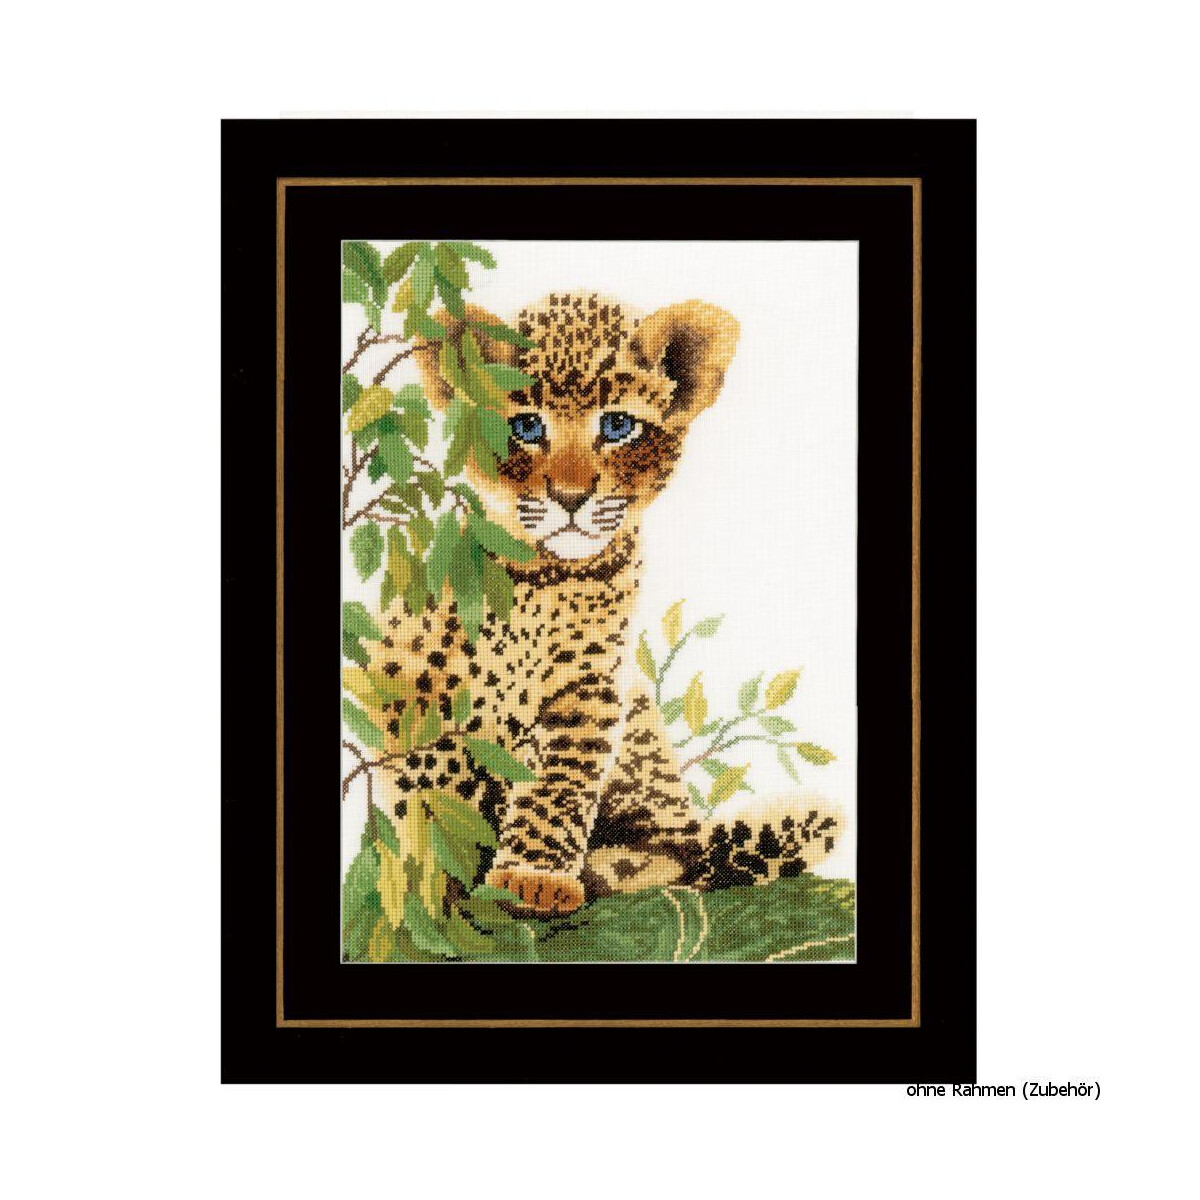 An embroidery pack from Lanarte shows a young leopard cub...